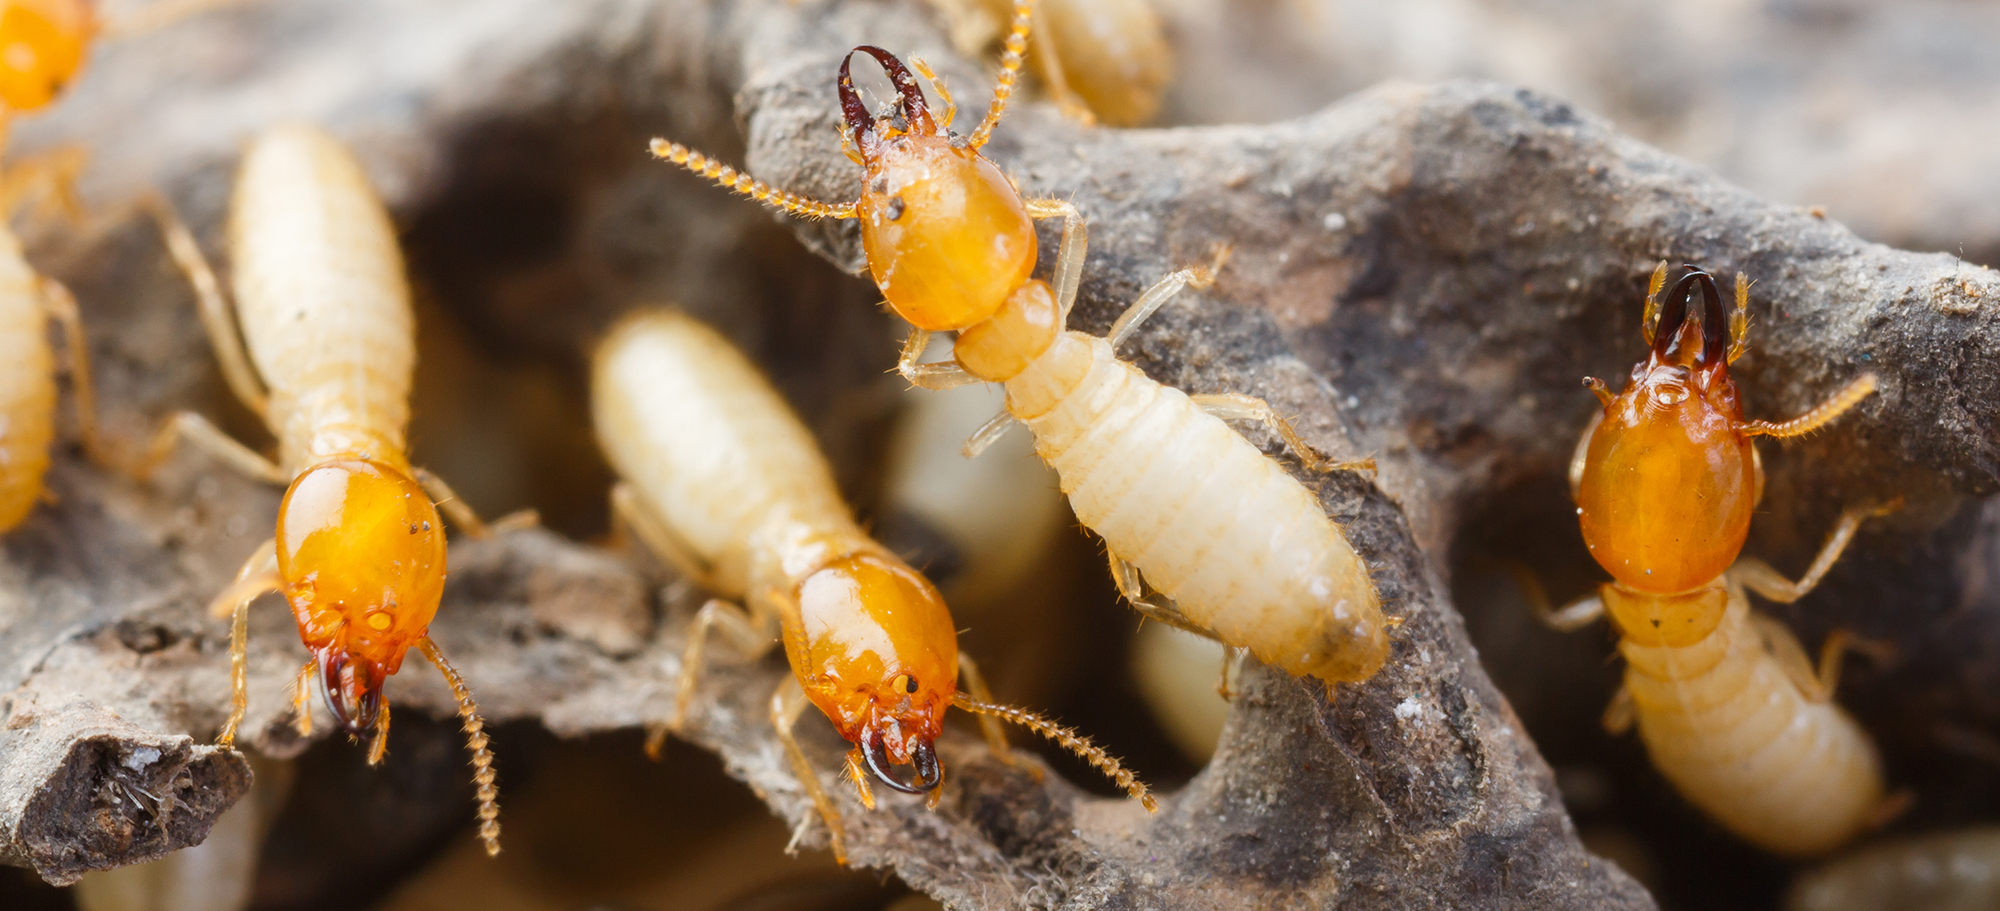 Photo of multiple termites walking on a piece of wood